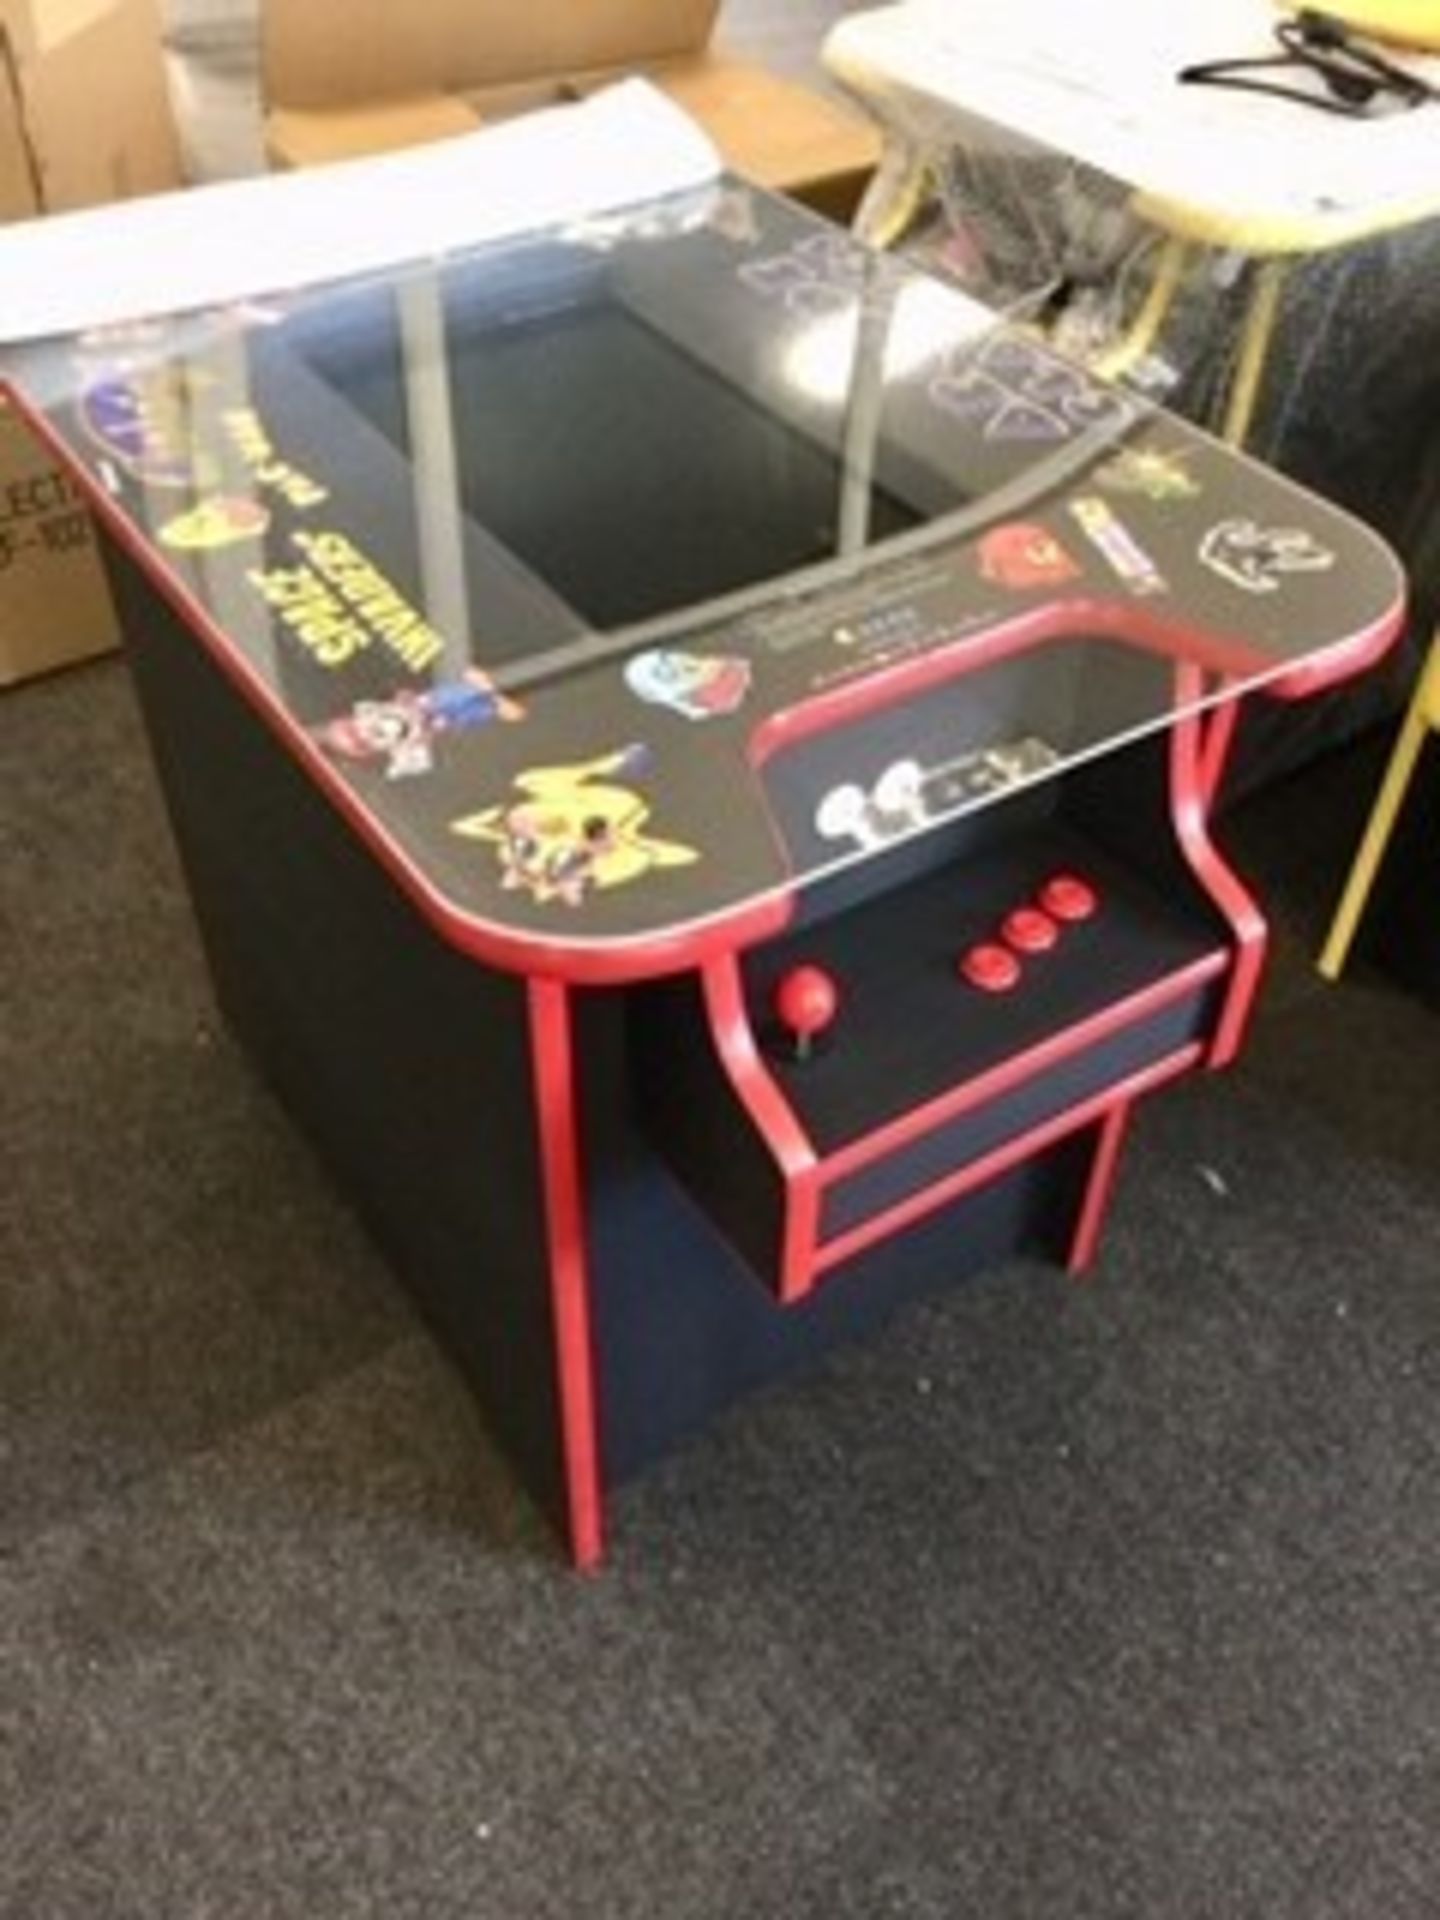 Brand New Space Invaders Machine / Cocktail Cabinet with 60 Classic Games Installed -PAC-Man, Donkey